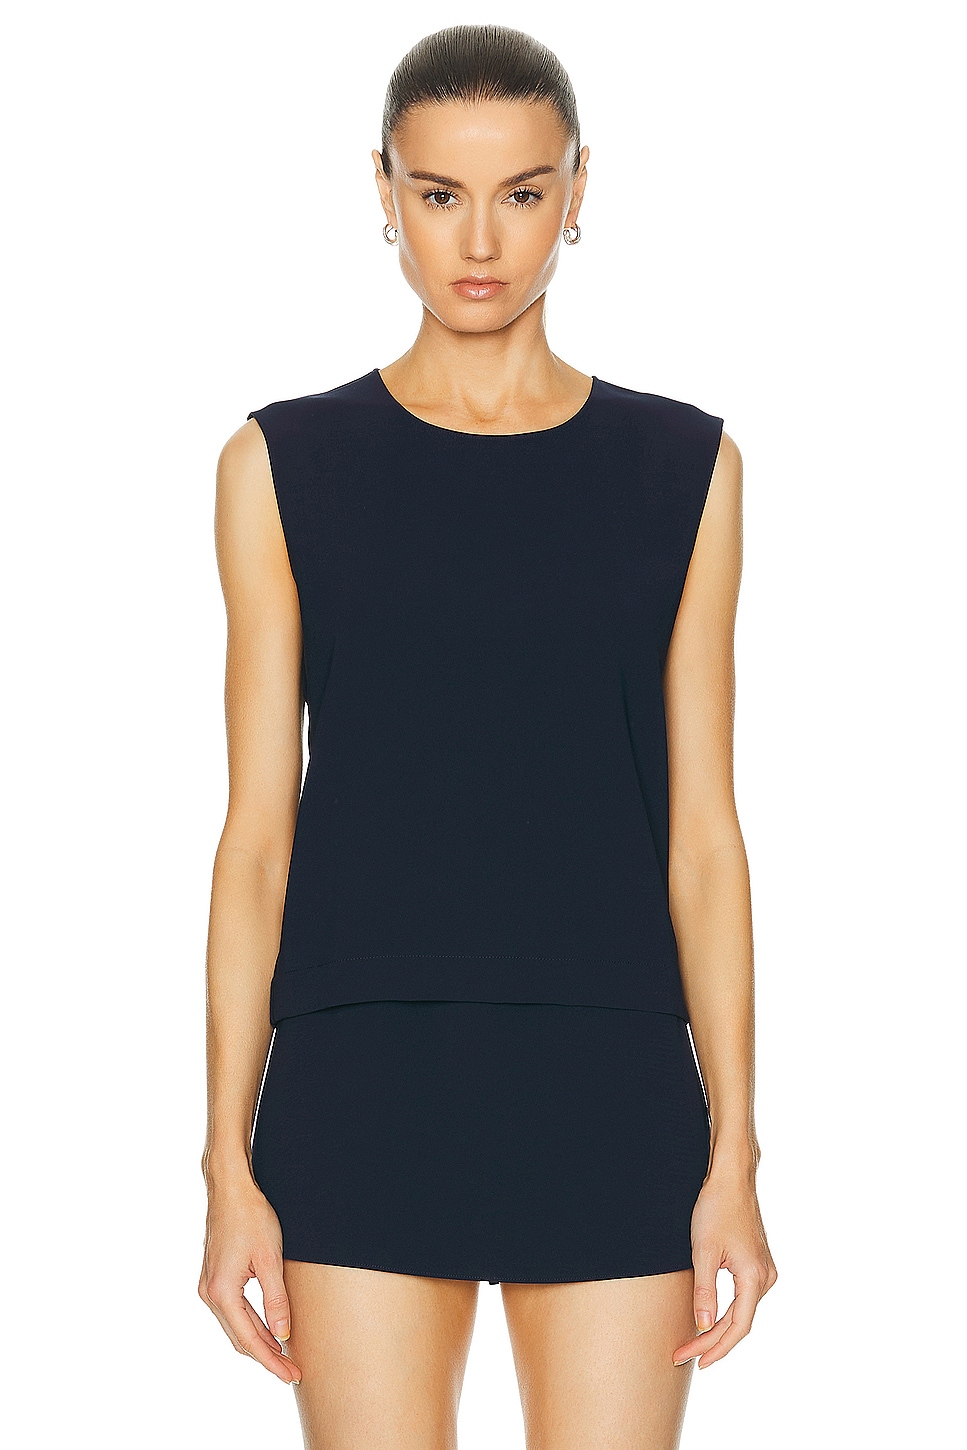 Image 1 of LESET Arielle Sleeveless Crew Top in Royal Navy